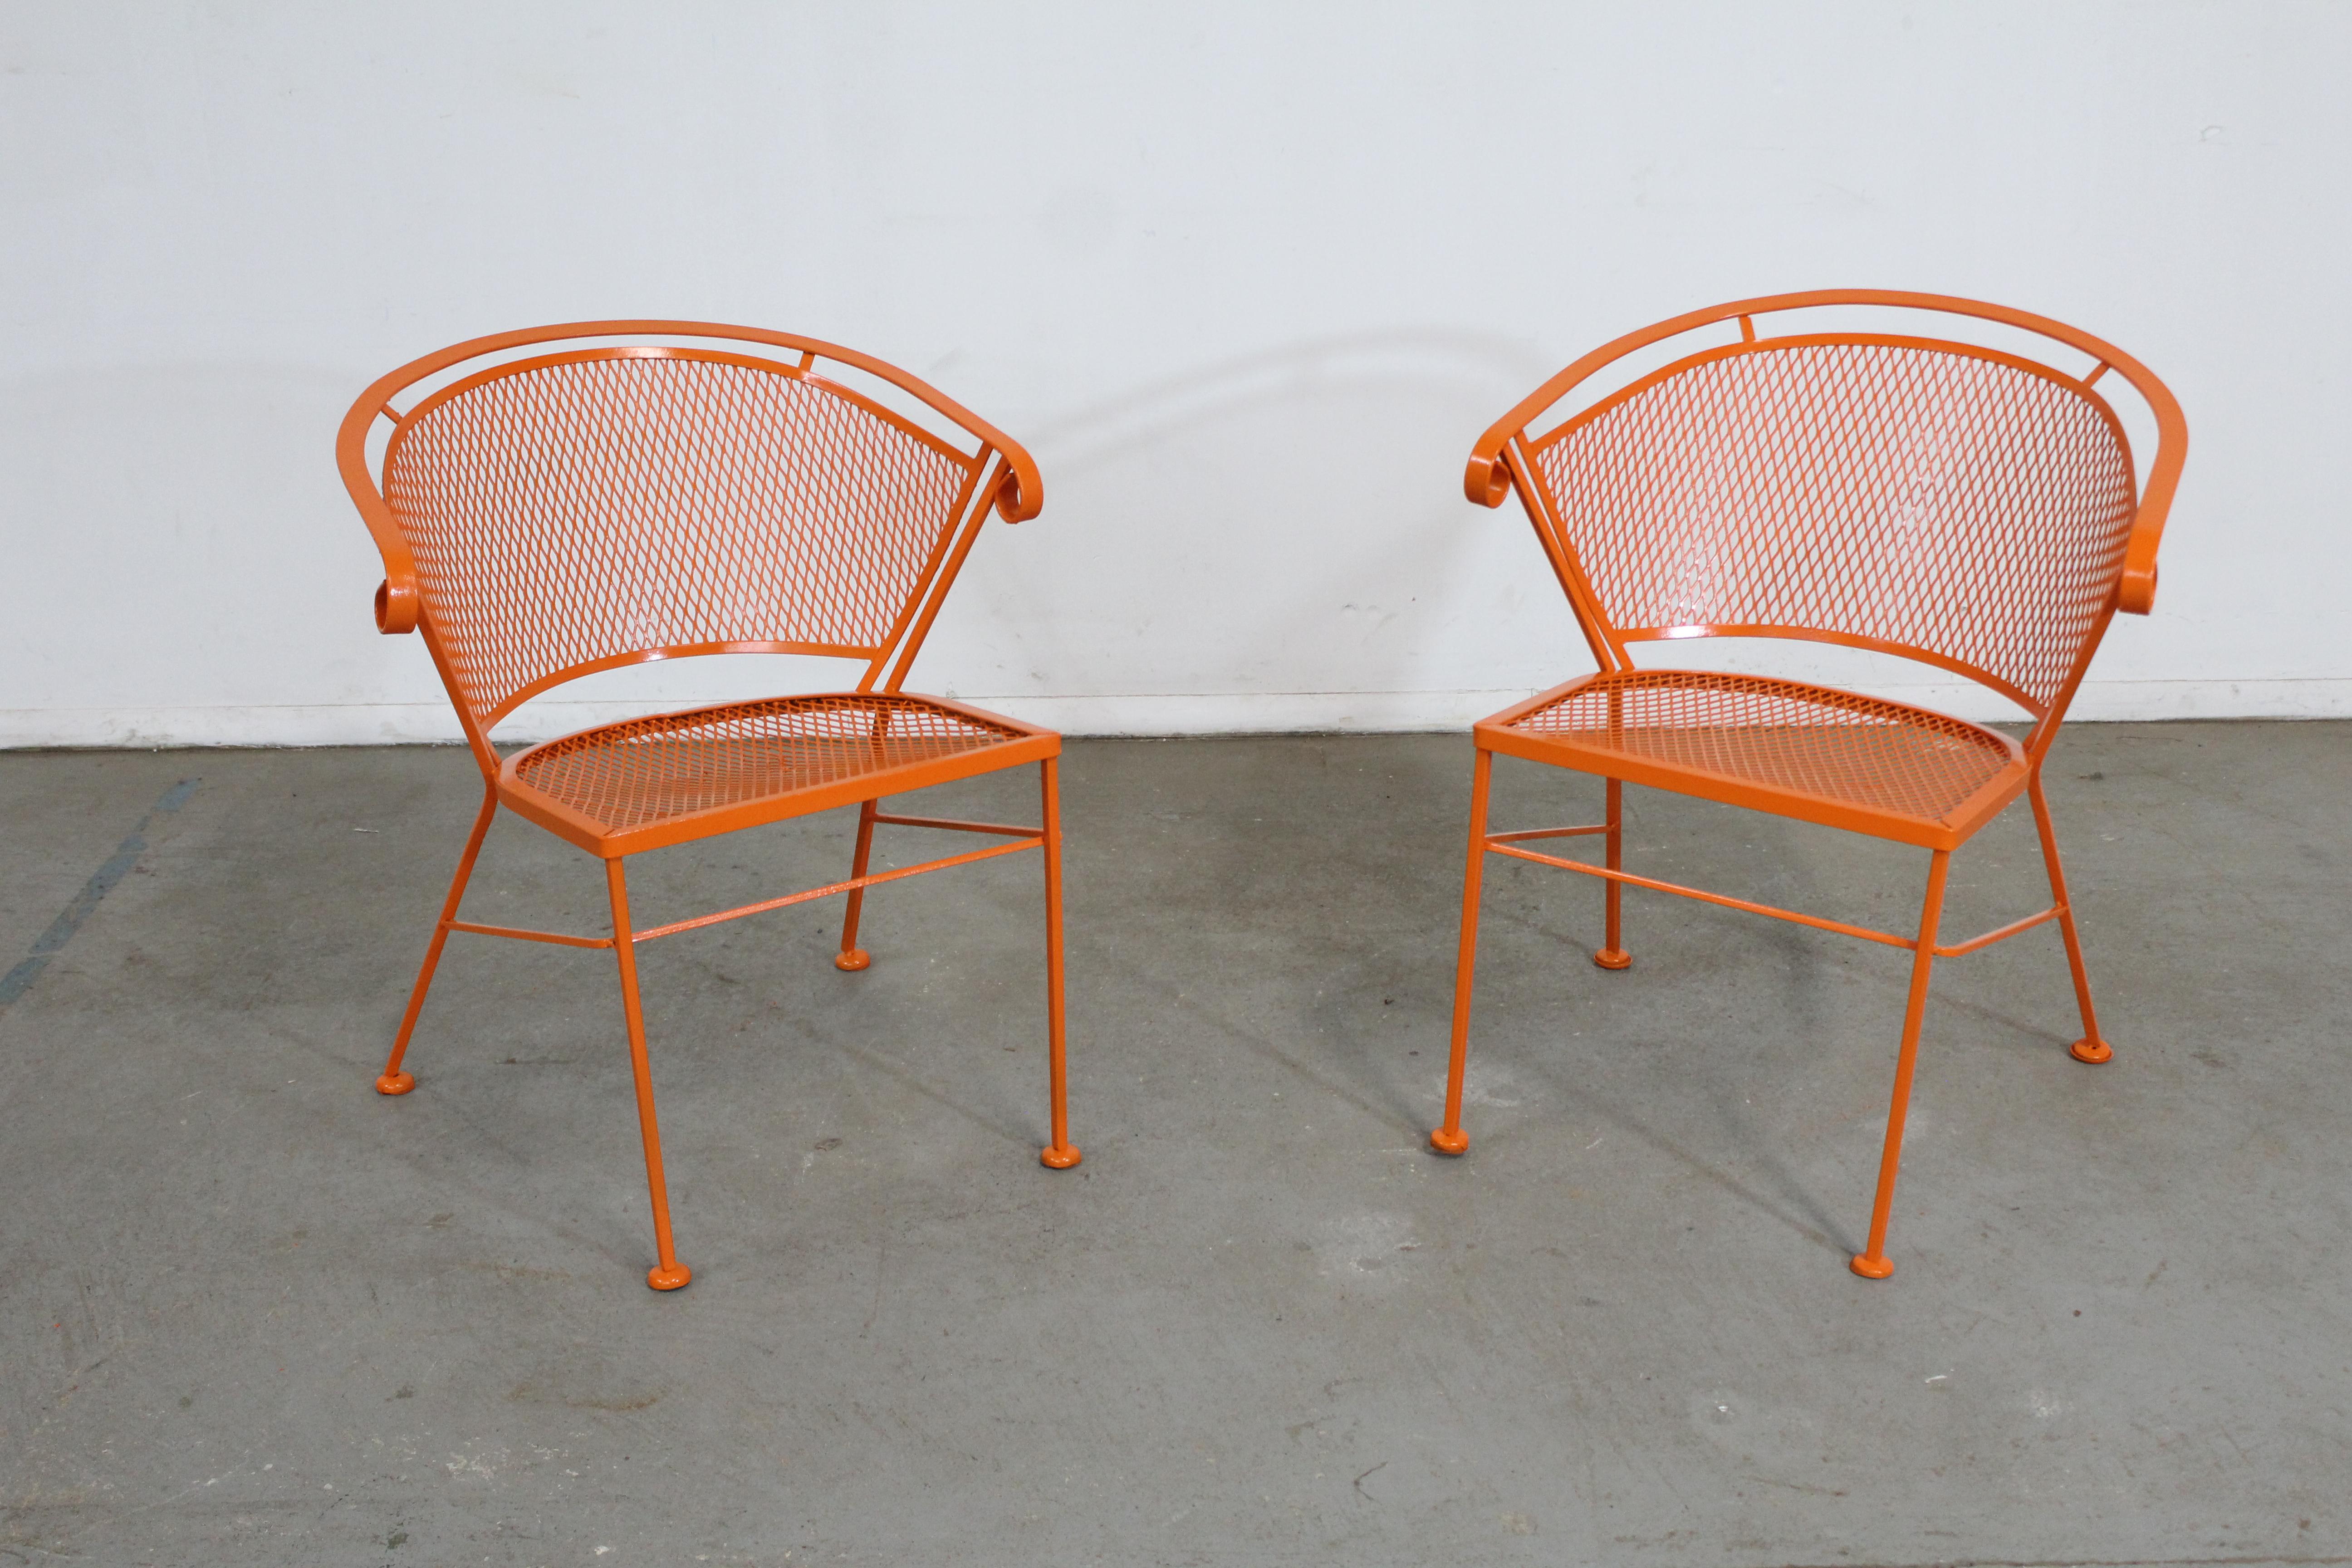 Pair of Mid-Century Modern Atomic Orange Salterini Style Outdoor Metal Curved Back Chairs

Offered is a pair of Pair of Mid-Century Modern Atomic orange Outdoor Metal Curved Back Chairs, circa 1968. These chairs have been repainted in an atomic